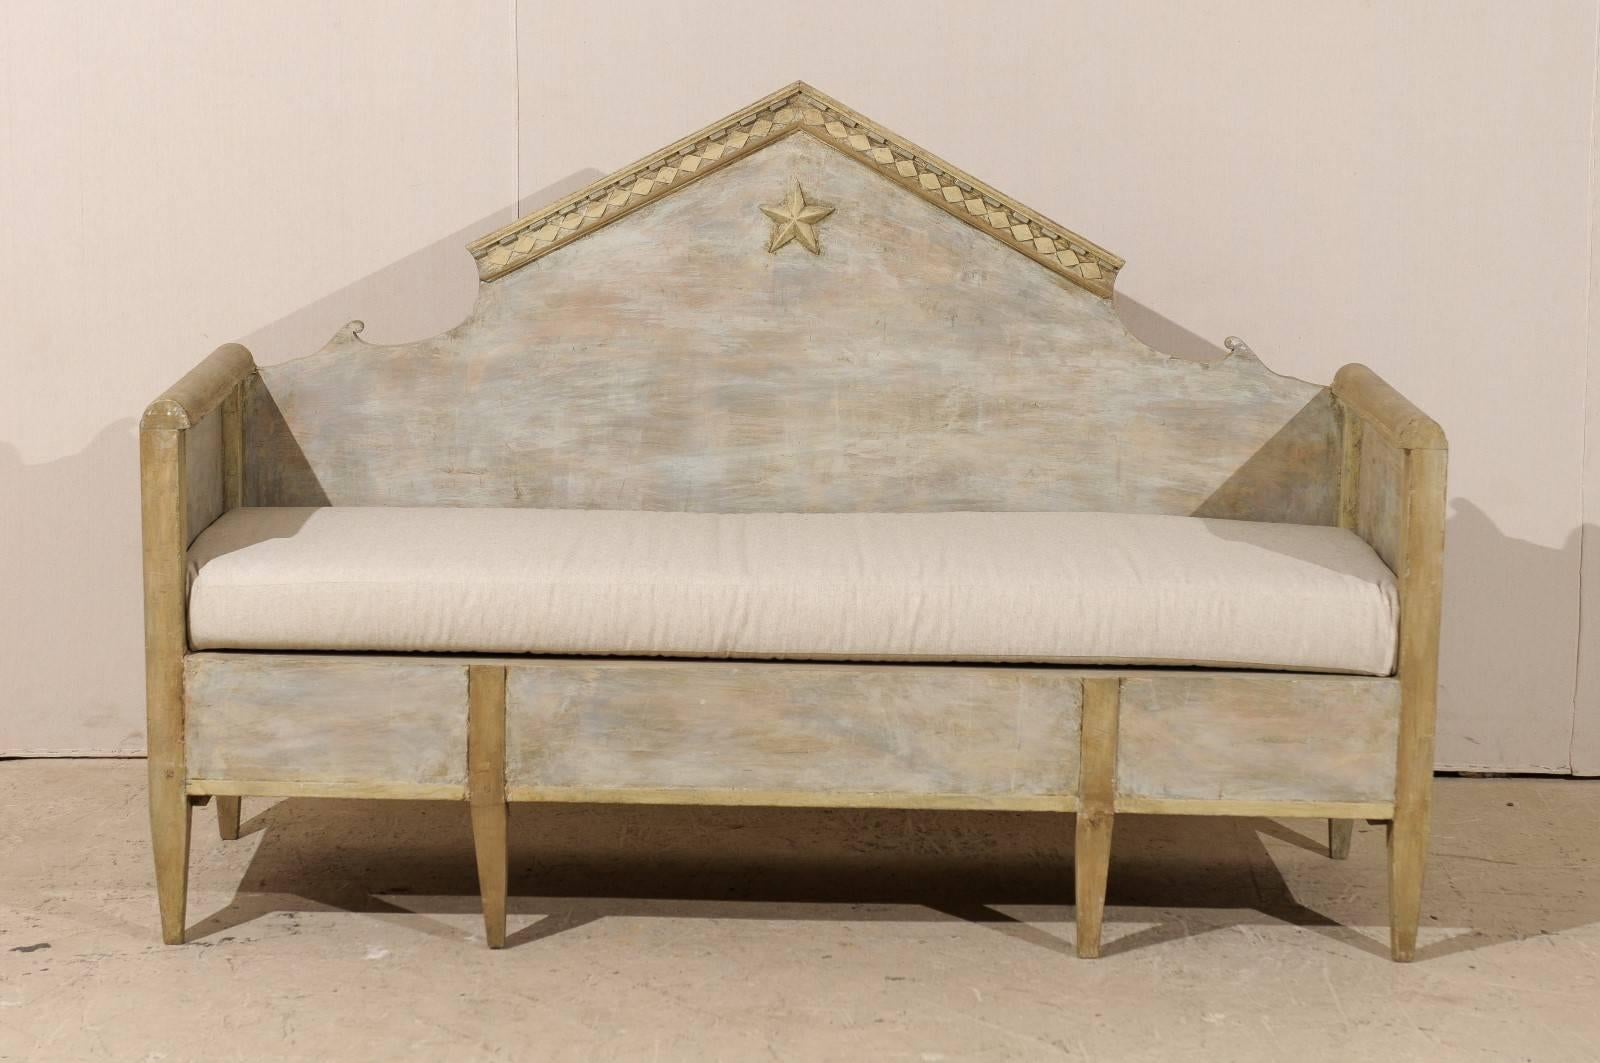 A Swedish Karl Johan style bench from the early 1800s. This 19th century Swedish painted wood sofa bench features a pyramidal back pediment with a five-pointed star at the top center, high arms and tapered legs. The overall color of this piece is a